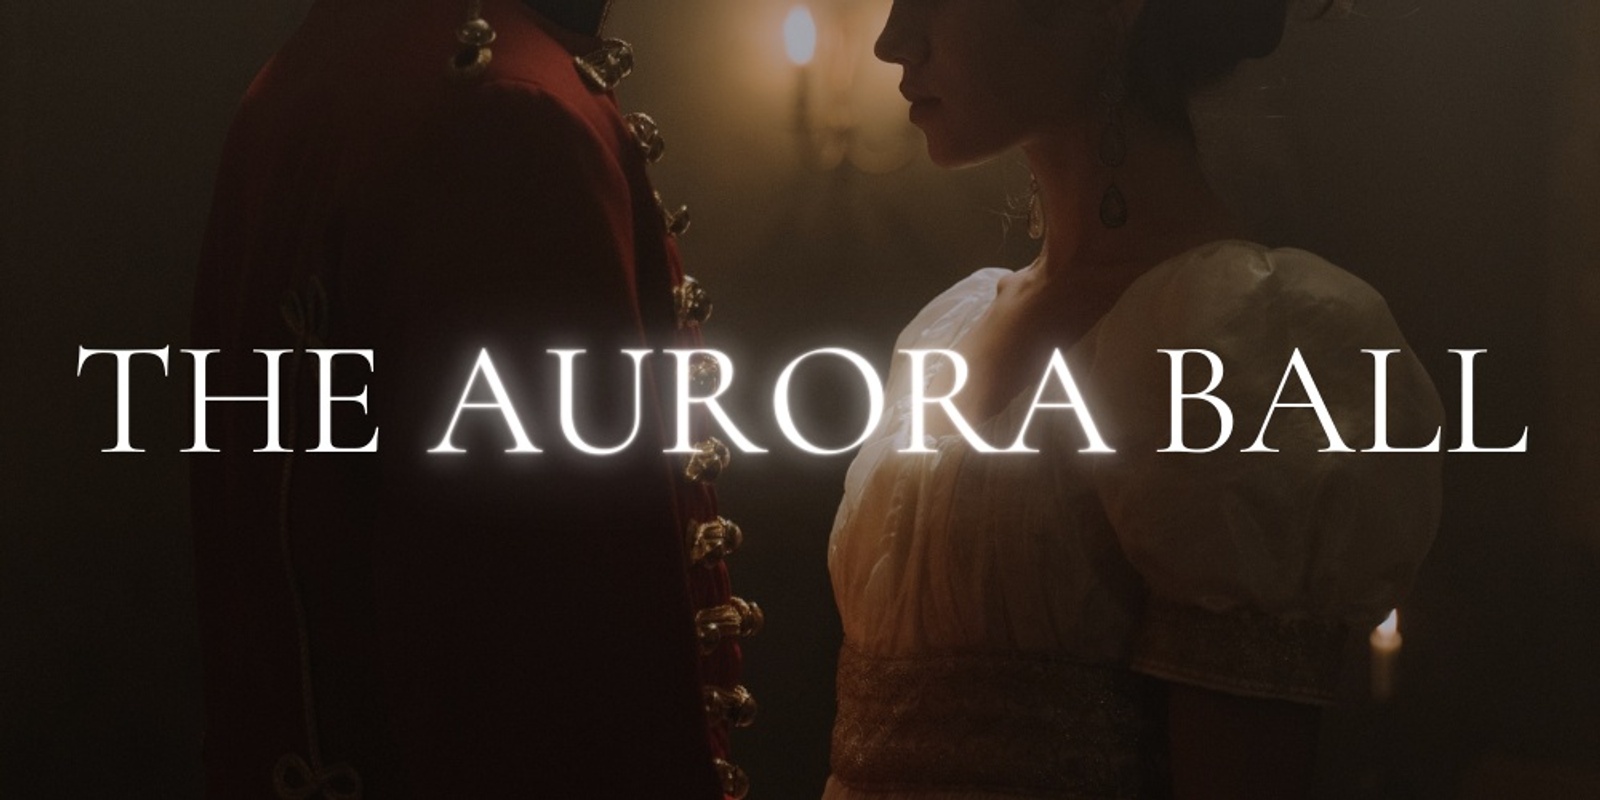 Banner image for The Aurora Ball